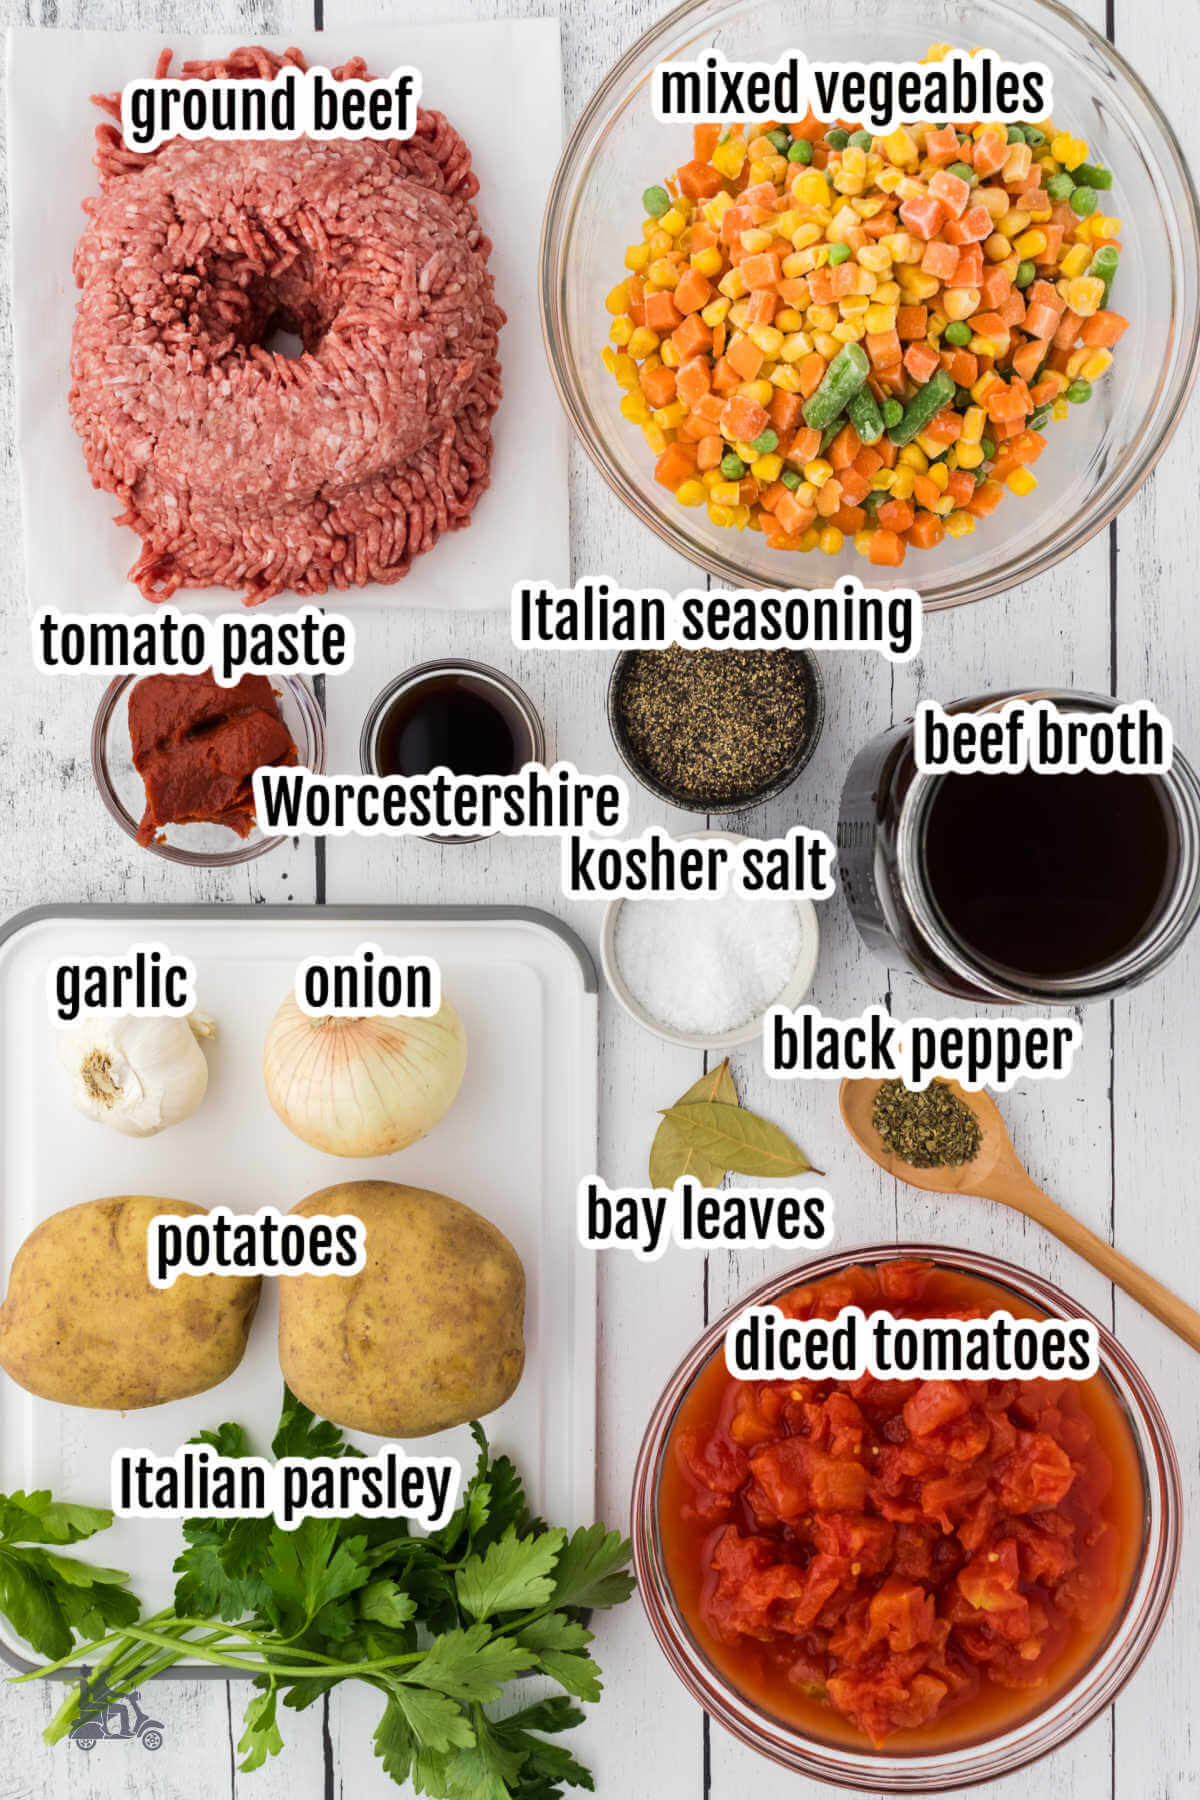 Image of ingredients needed to make homemade ground beef vegetable soup.
